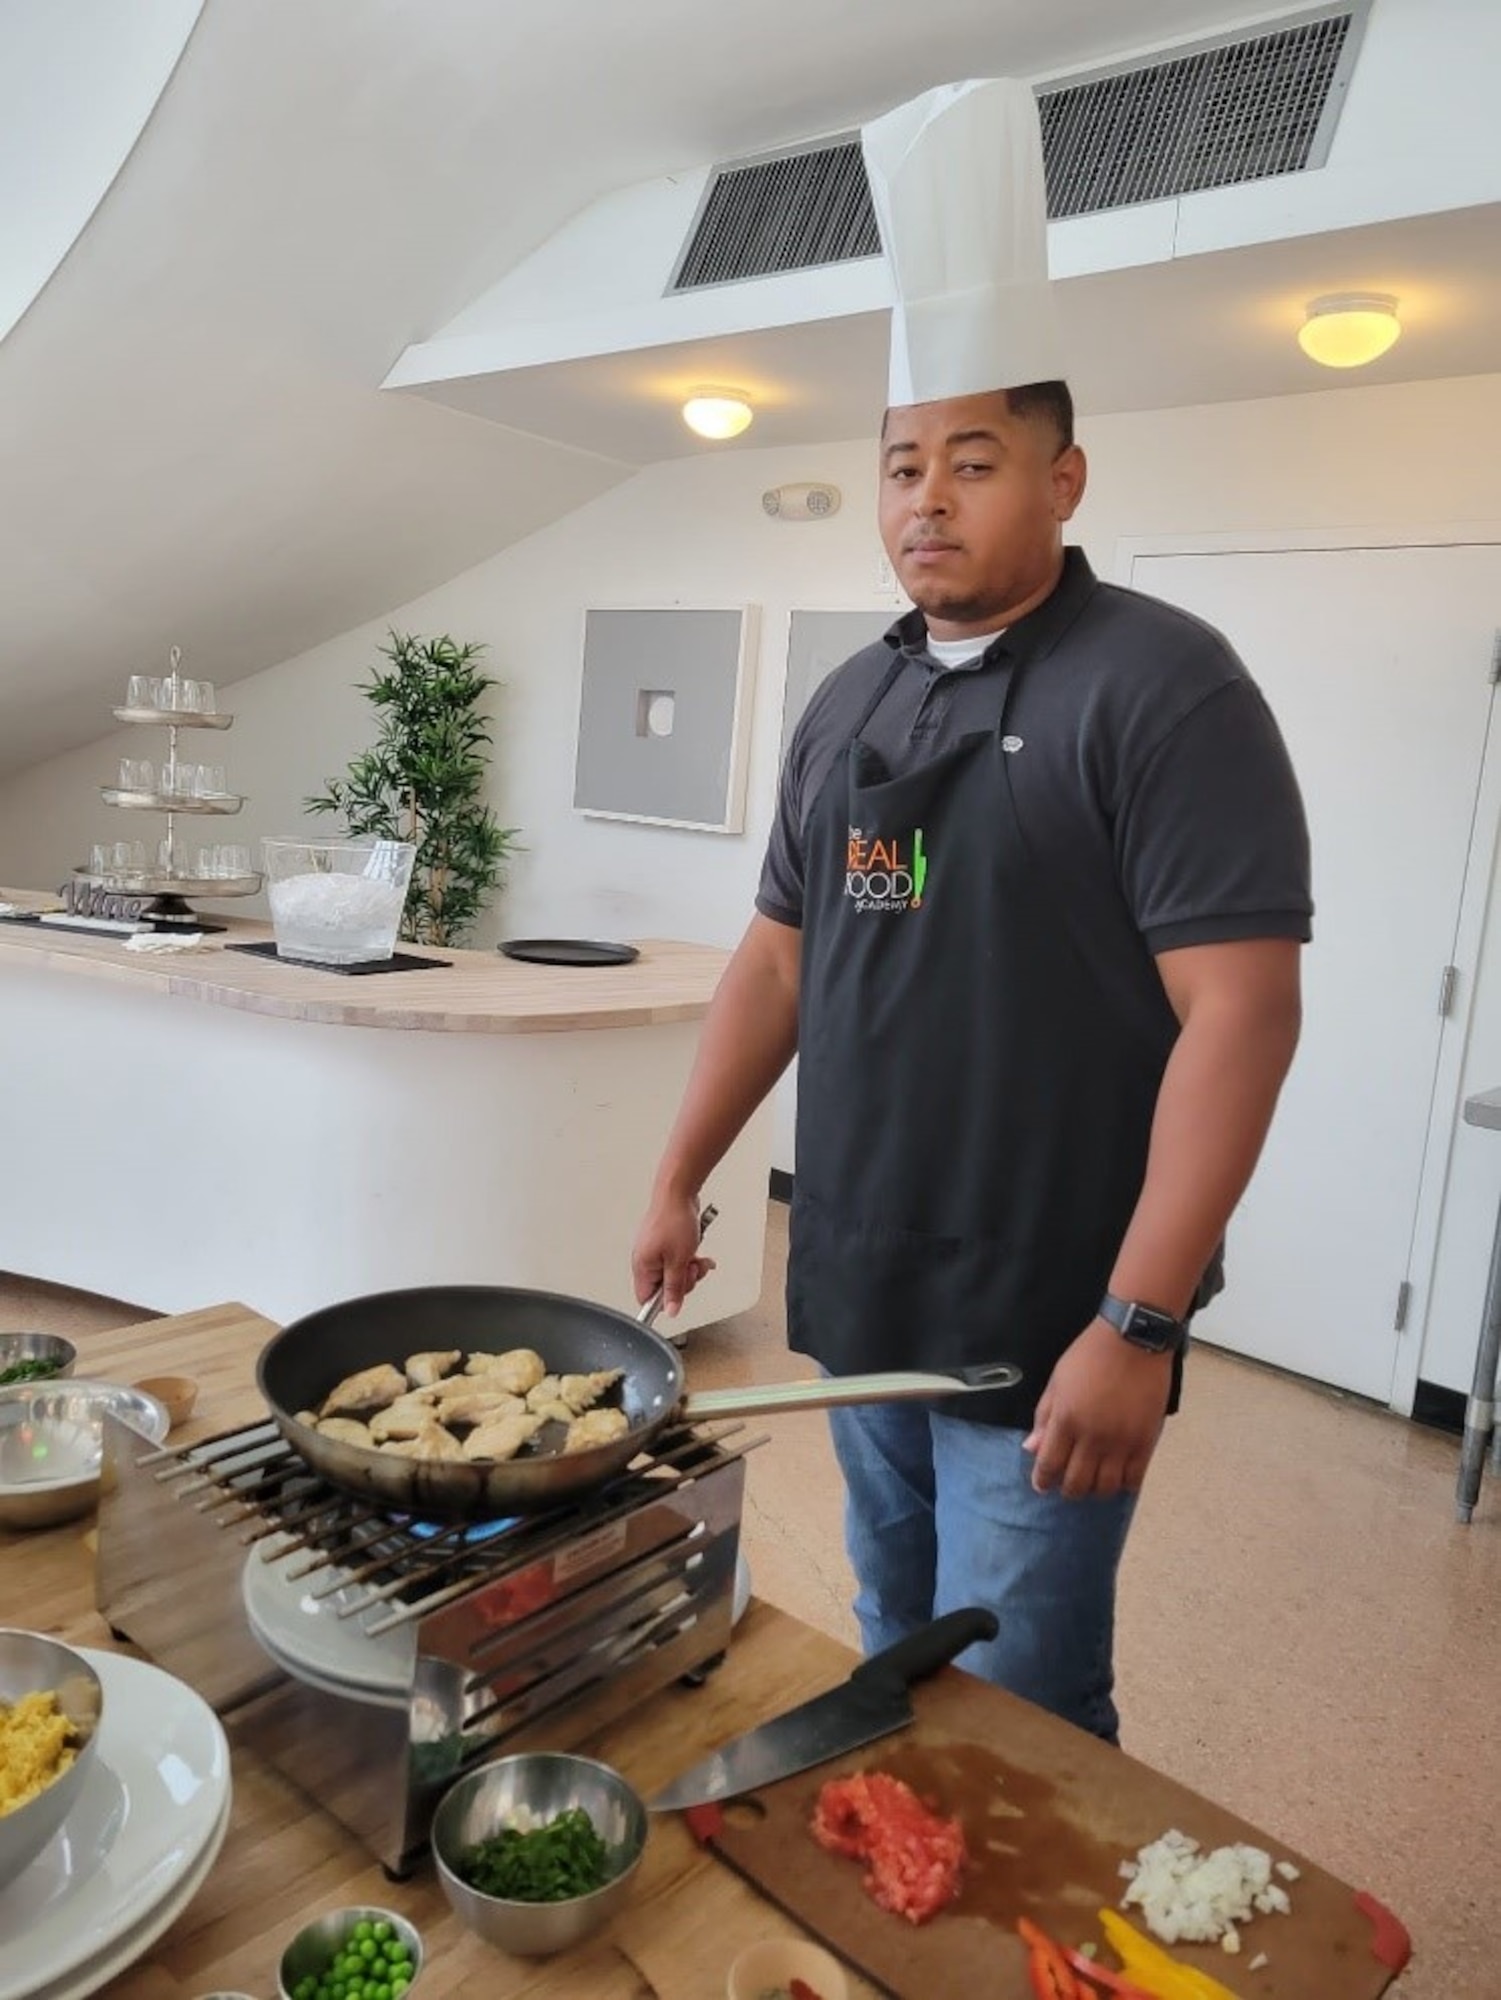 Spanish Language Enabled Airman Program Scholar Tech. Sgt. Trymaine Kelley immersed himself in the Hispanic culture through the art of cooking. (Courtesy photo)